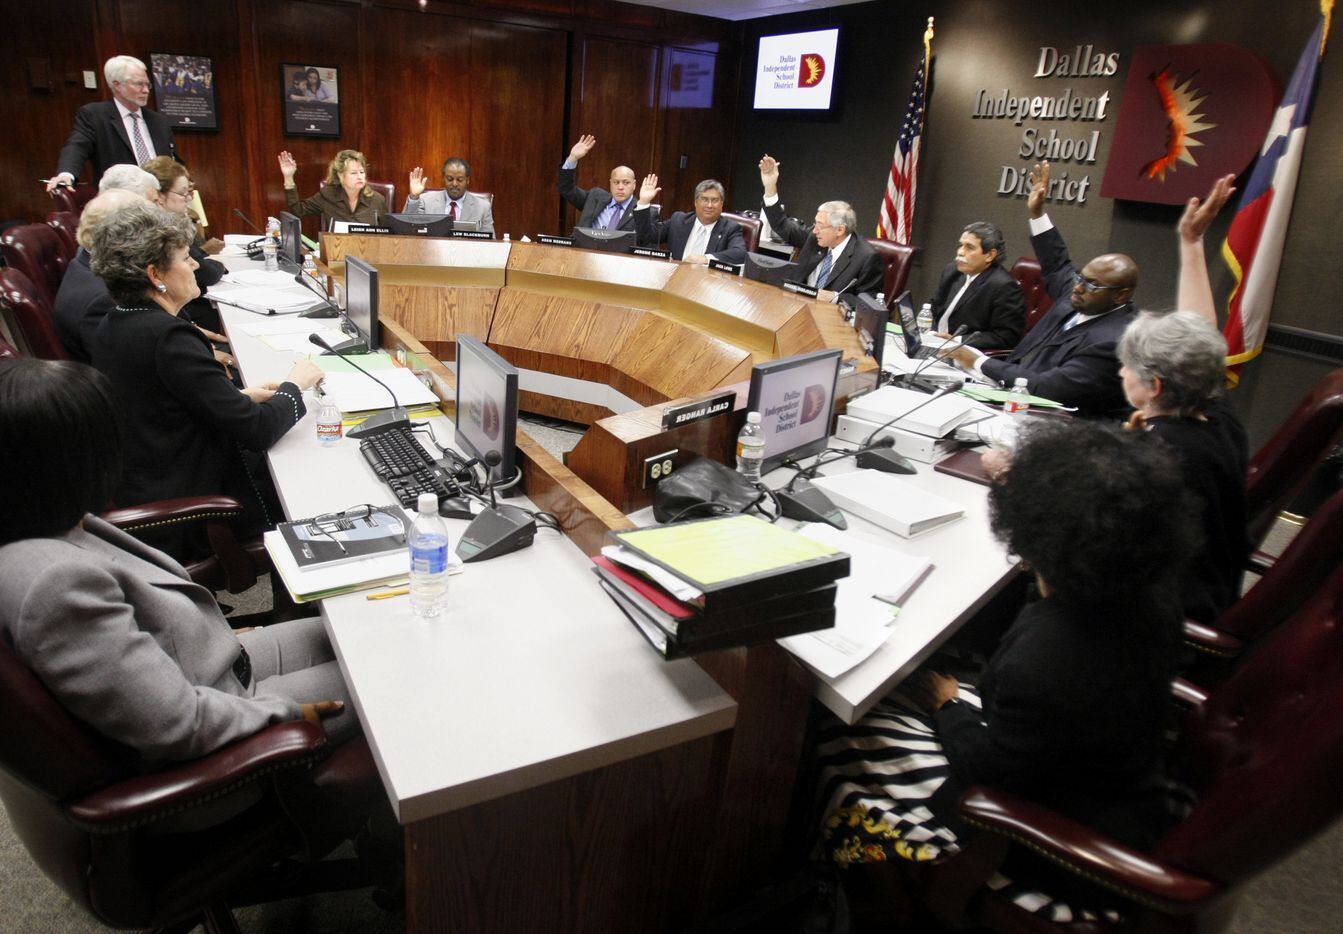 The DISD board of trustees voted 8-0 to declare a financial emergency on Sept. 19, 2008. Superintendent Michael Hinojosa led a meeting where they discussed how a $64 million budget hole took them by surprise and how they will cut the budget.